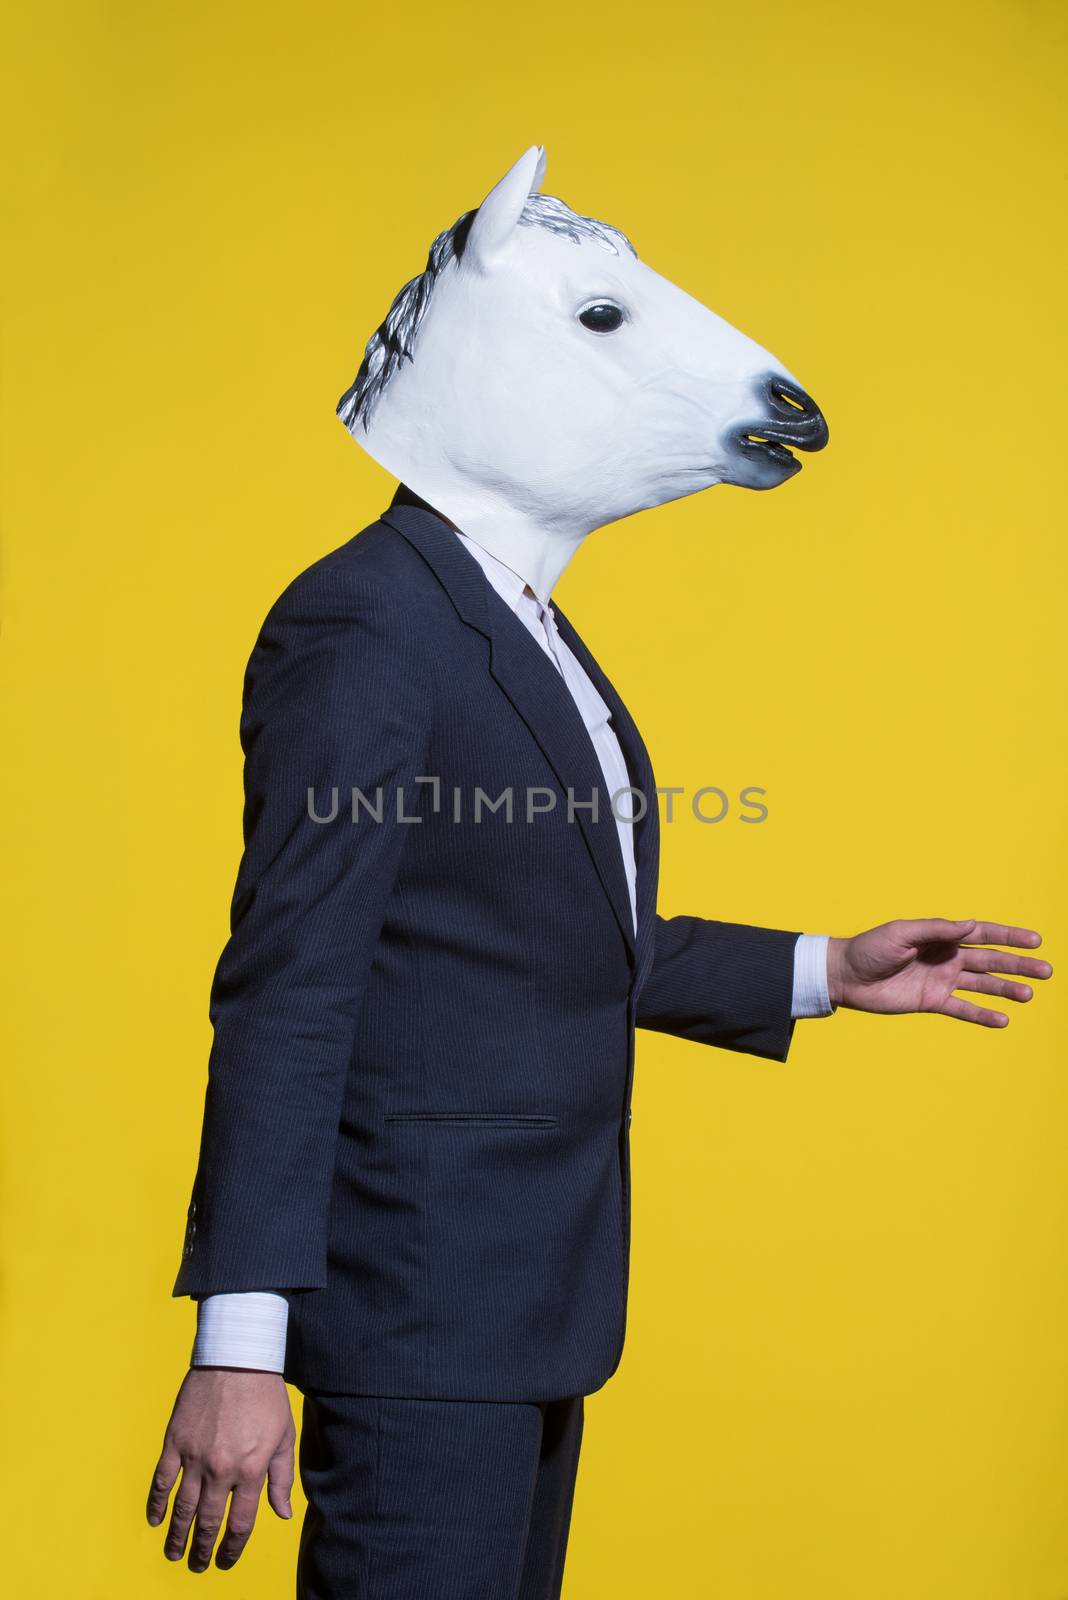 man with horse mask on yellow background by A_Karim